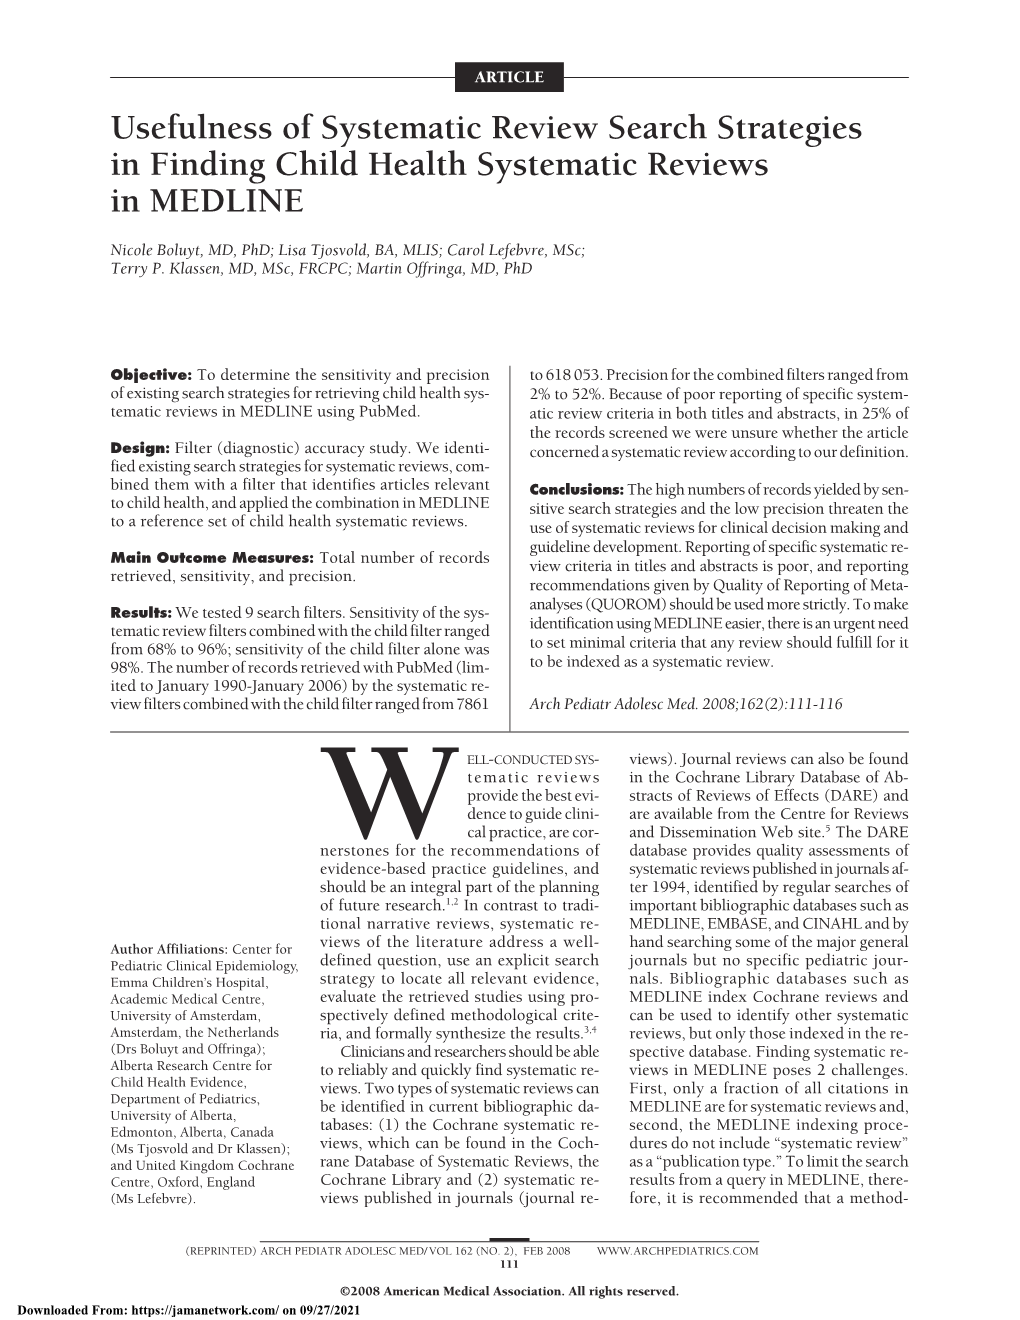 Usefulness of Systematic Review Search Strategies in Finding Child Health Systematic Reviews in MEDLINE